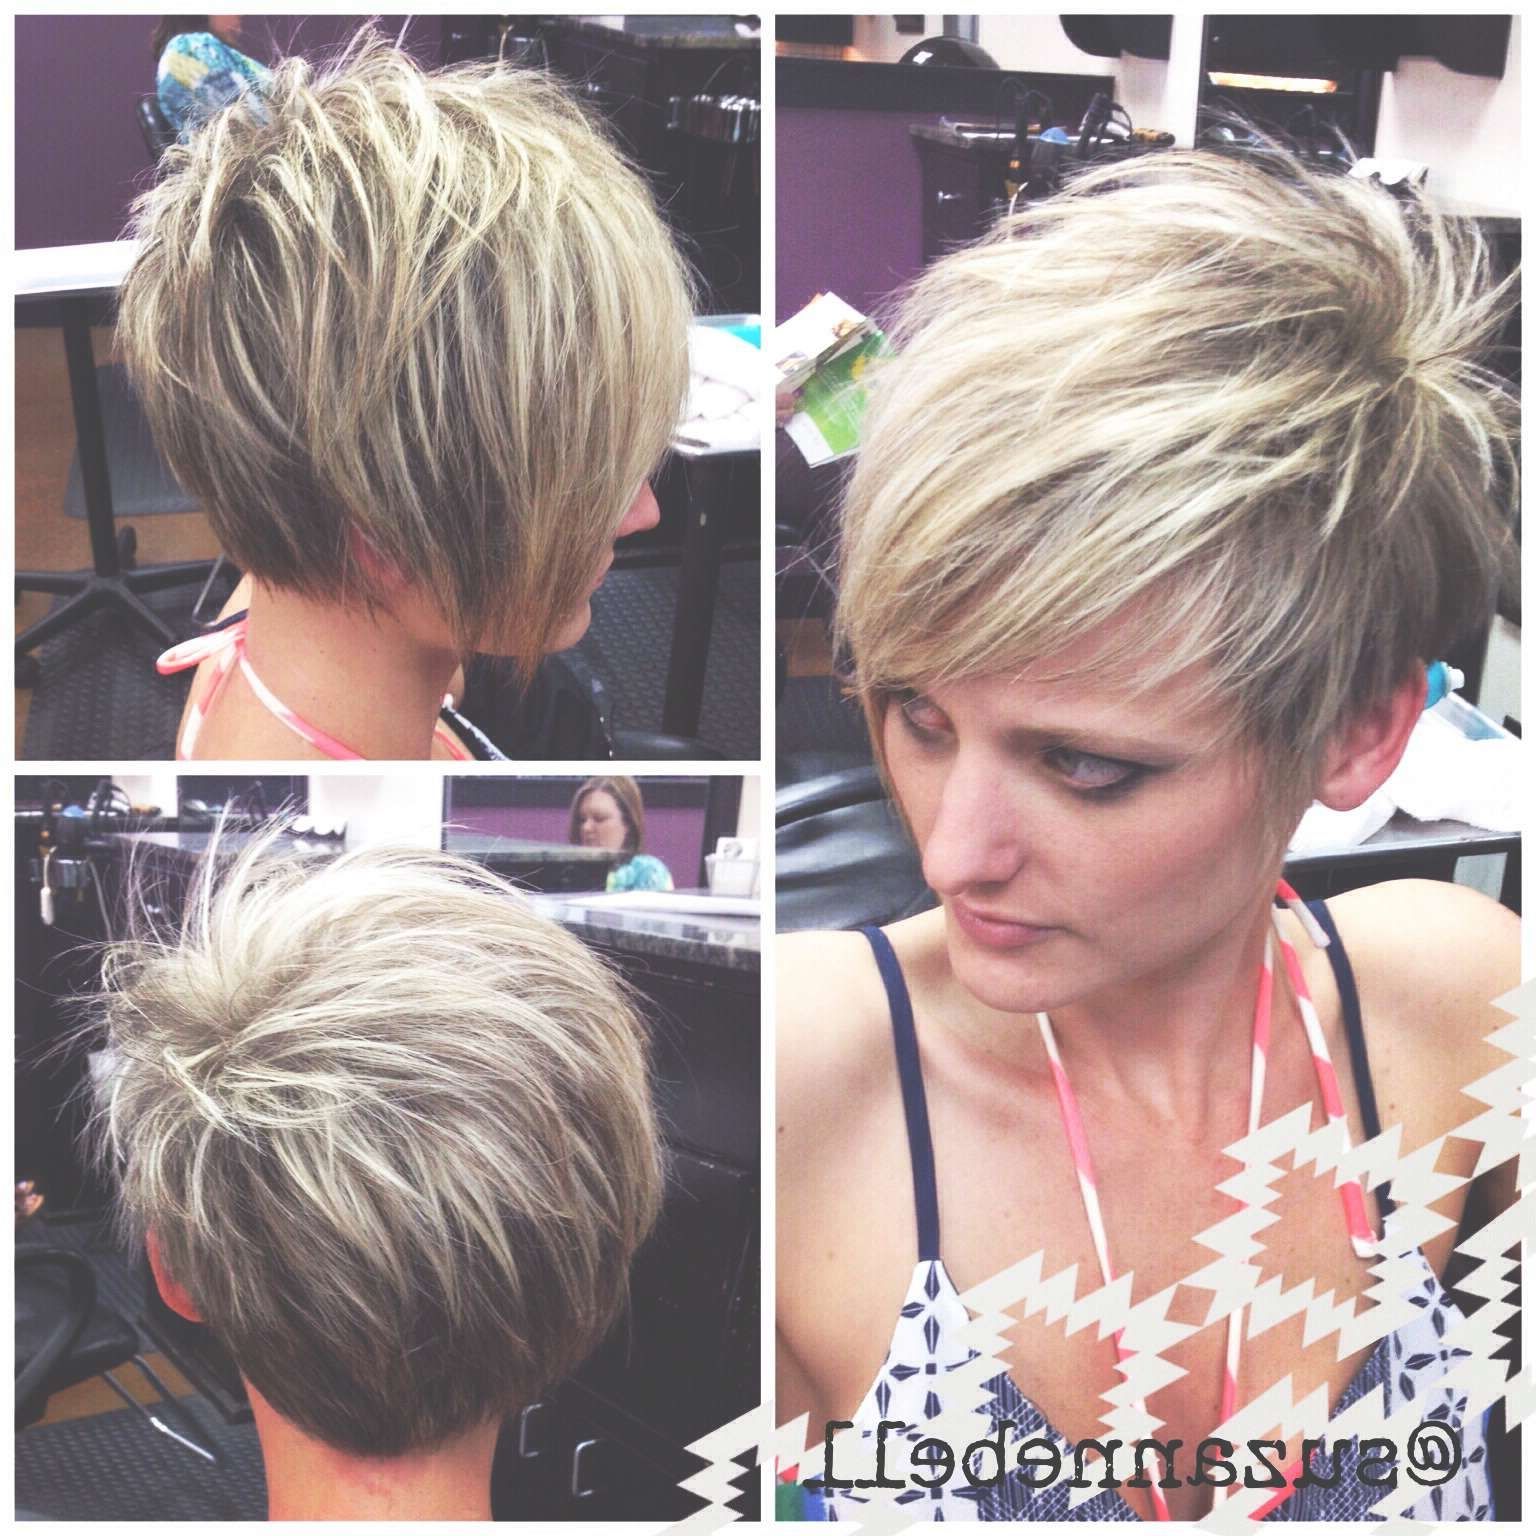 Asymmetrical Pixie | Hair Inspiration | Pinterest | Asymmetrical With Regard To Most Up To Date Asymmetrical Pixie Hairstyles (View 3 of 15)